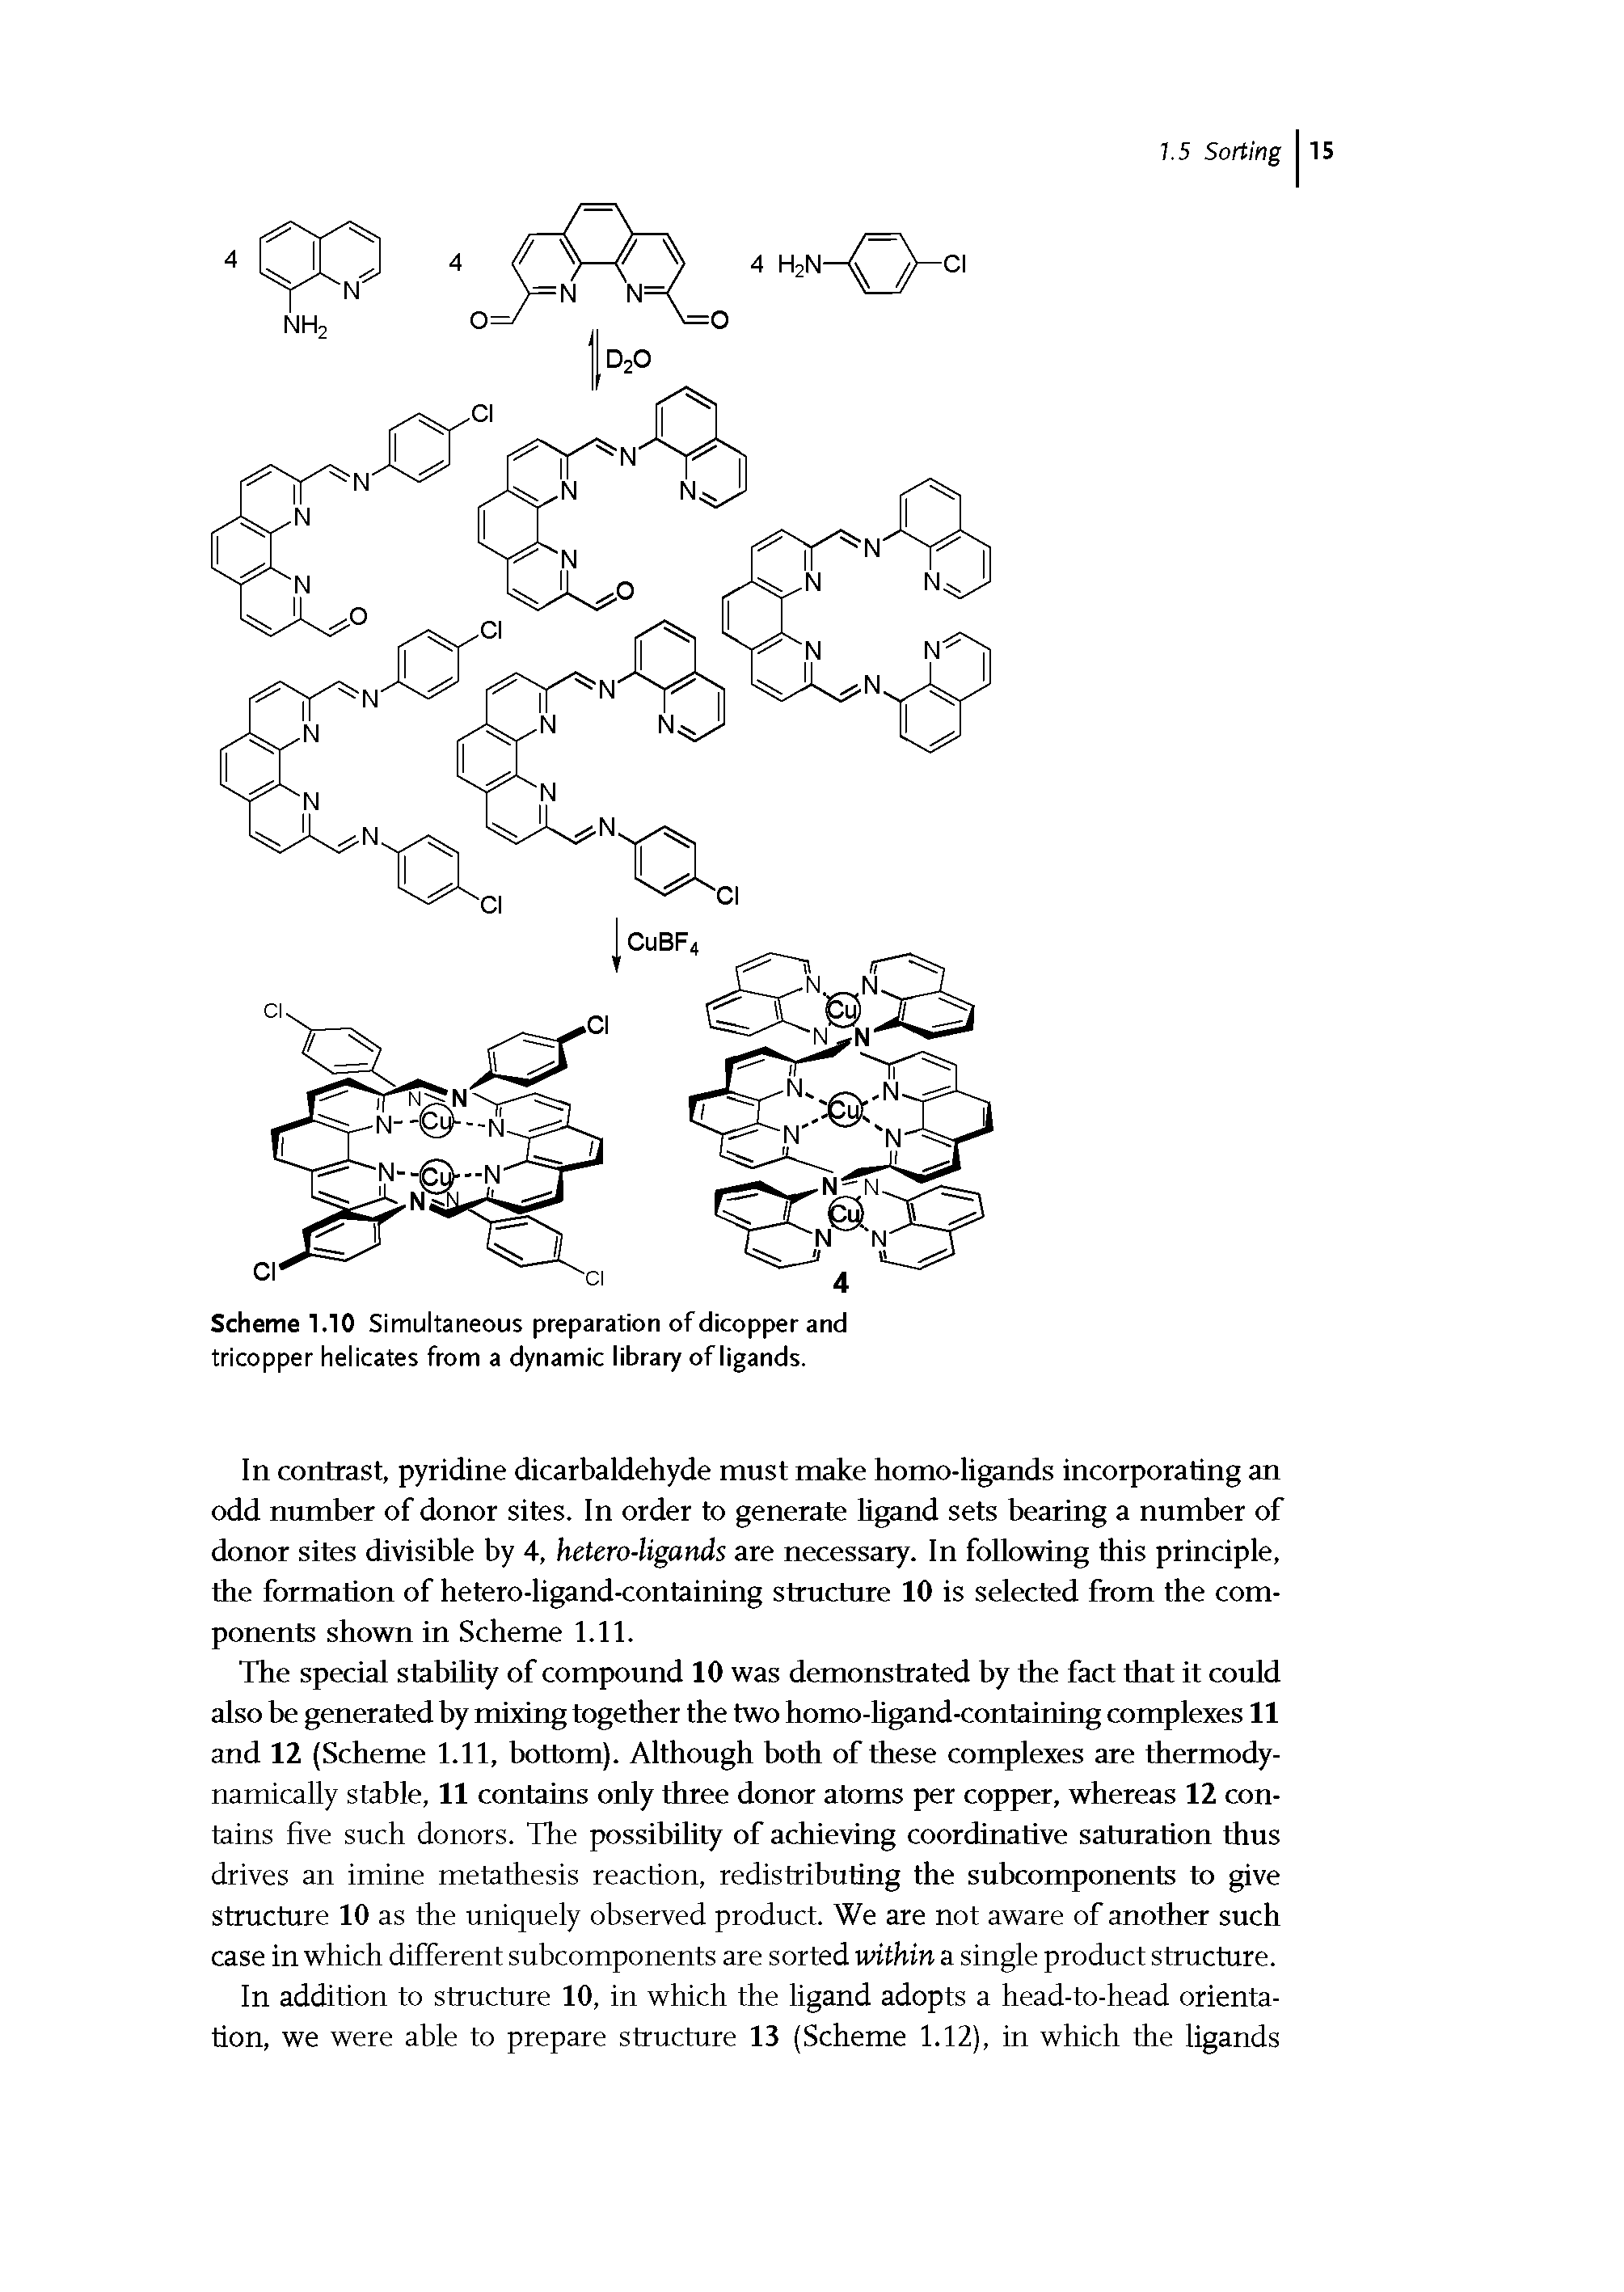 Scheme 1.10 Simultaneous preparation of dicopper and tricopper helicates from a dynamic library of ligands.